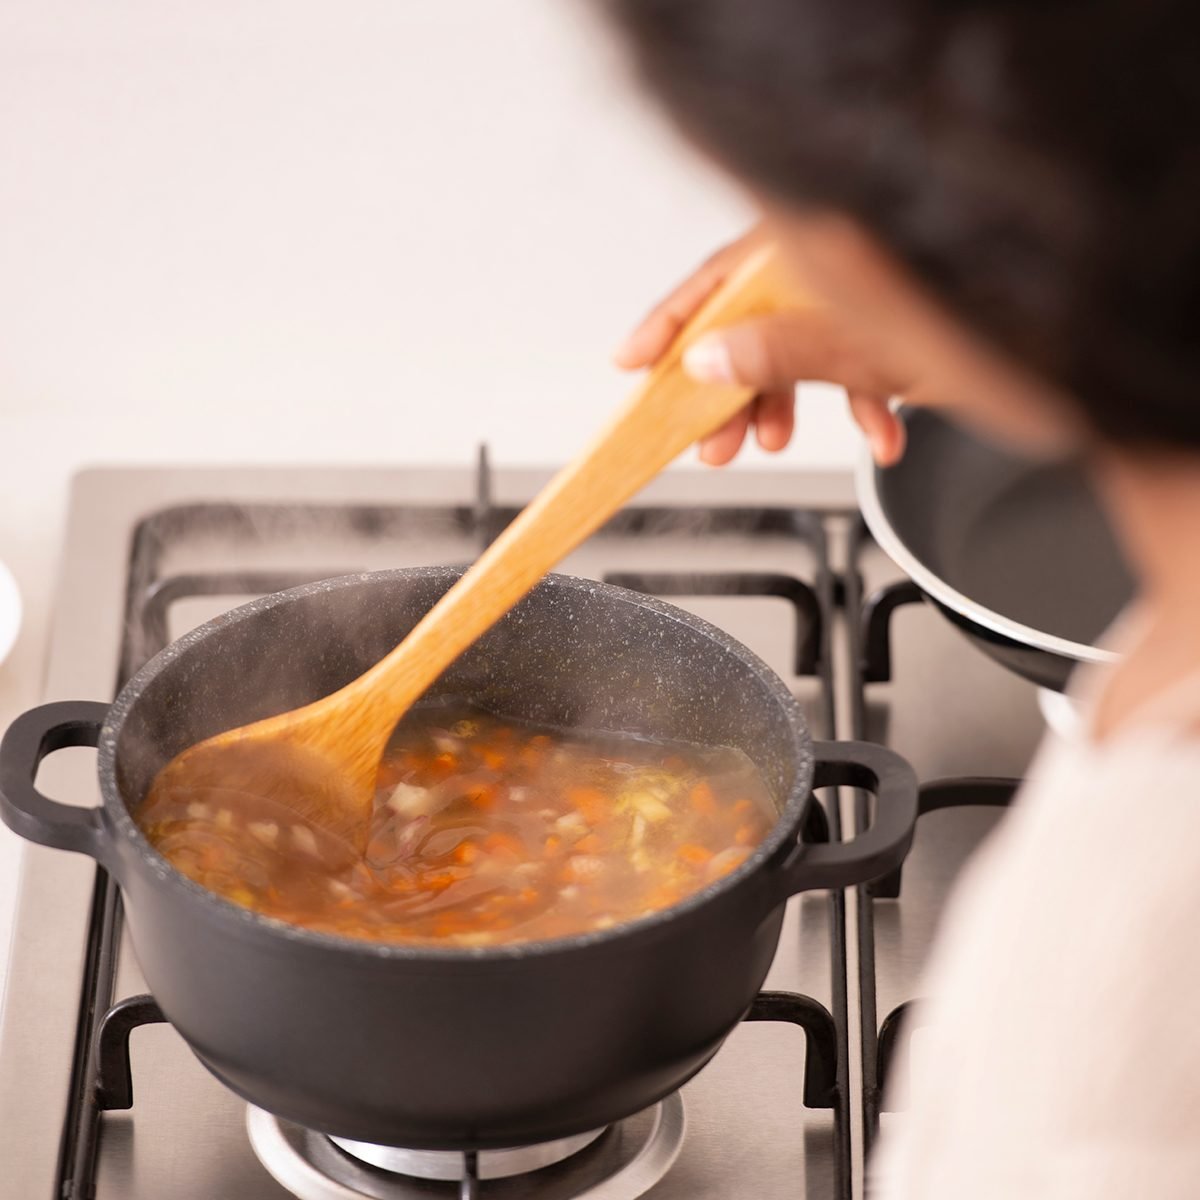 High angle, over the shoulder view of a woman stirring the boiling bouillon, using a wooden spoon. The woman cooking vegetable soup in a stock pot on a gas stove. A healthy meal, lifestyle and culinary concepts.